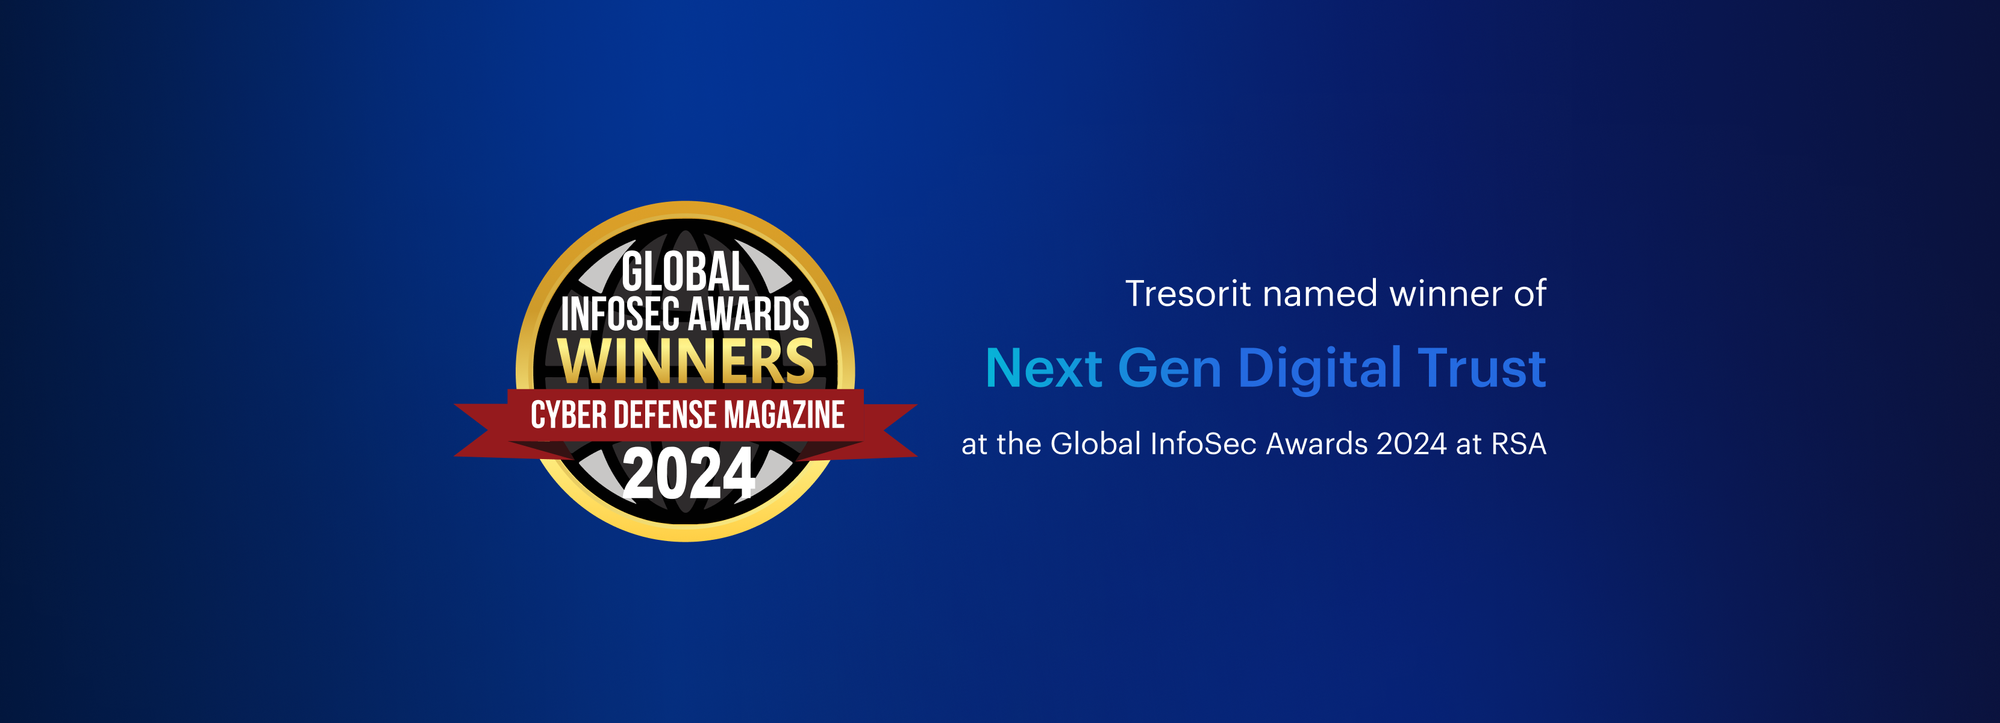 Tresorit wins in Digital Trust category at the Global InfoSec Awards at RSA